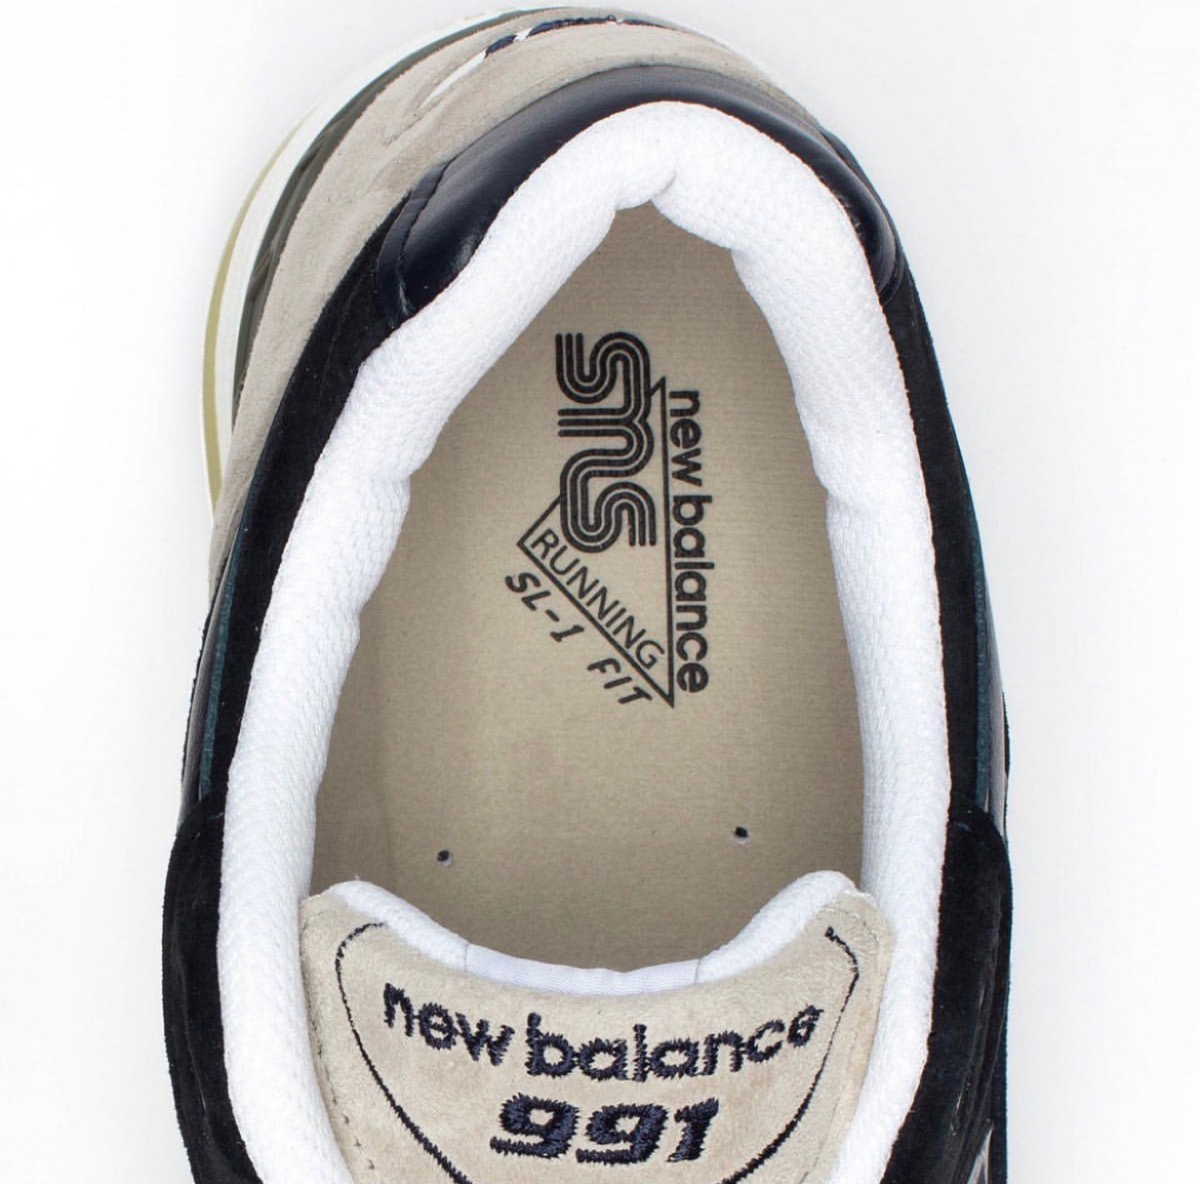 SNS × New Balance 991 Pack 全2色が国内2月26日に発売 | UP TO DATE